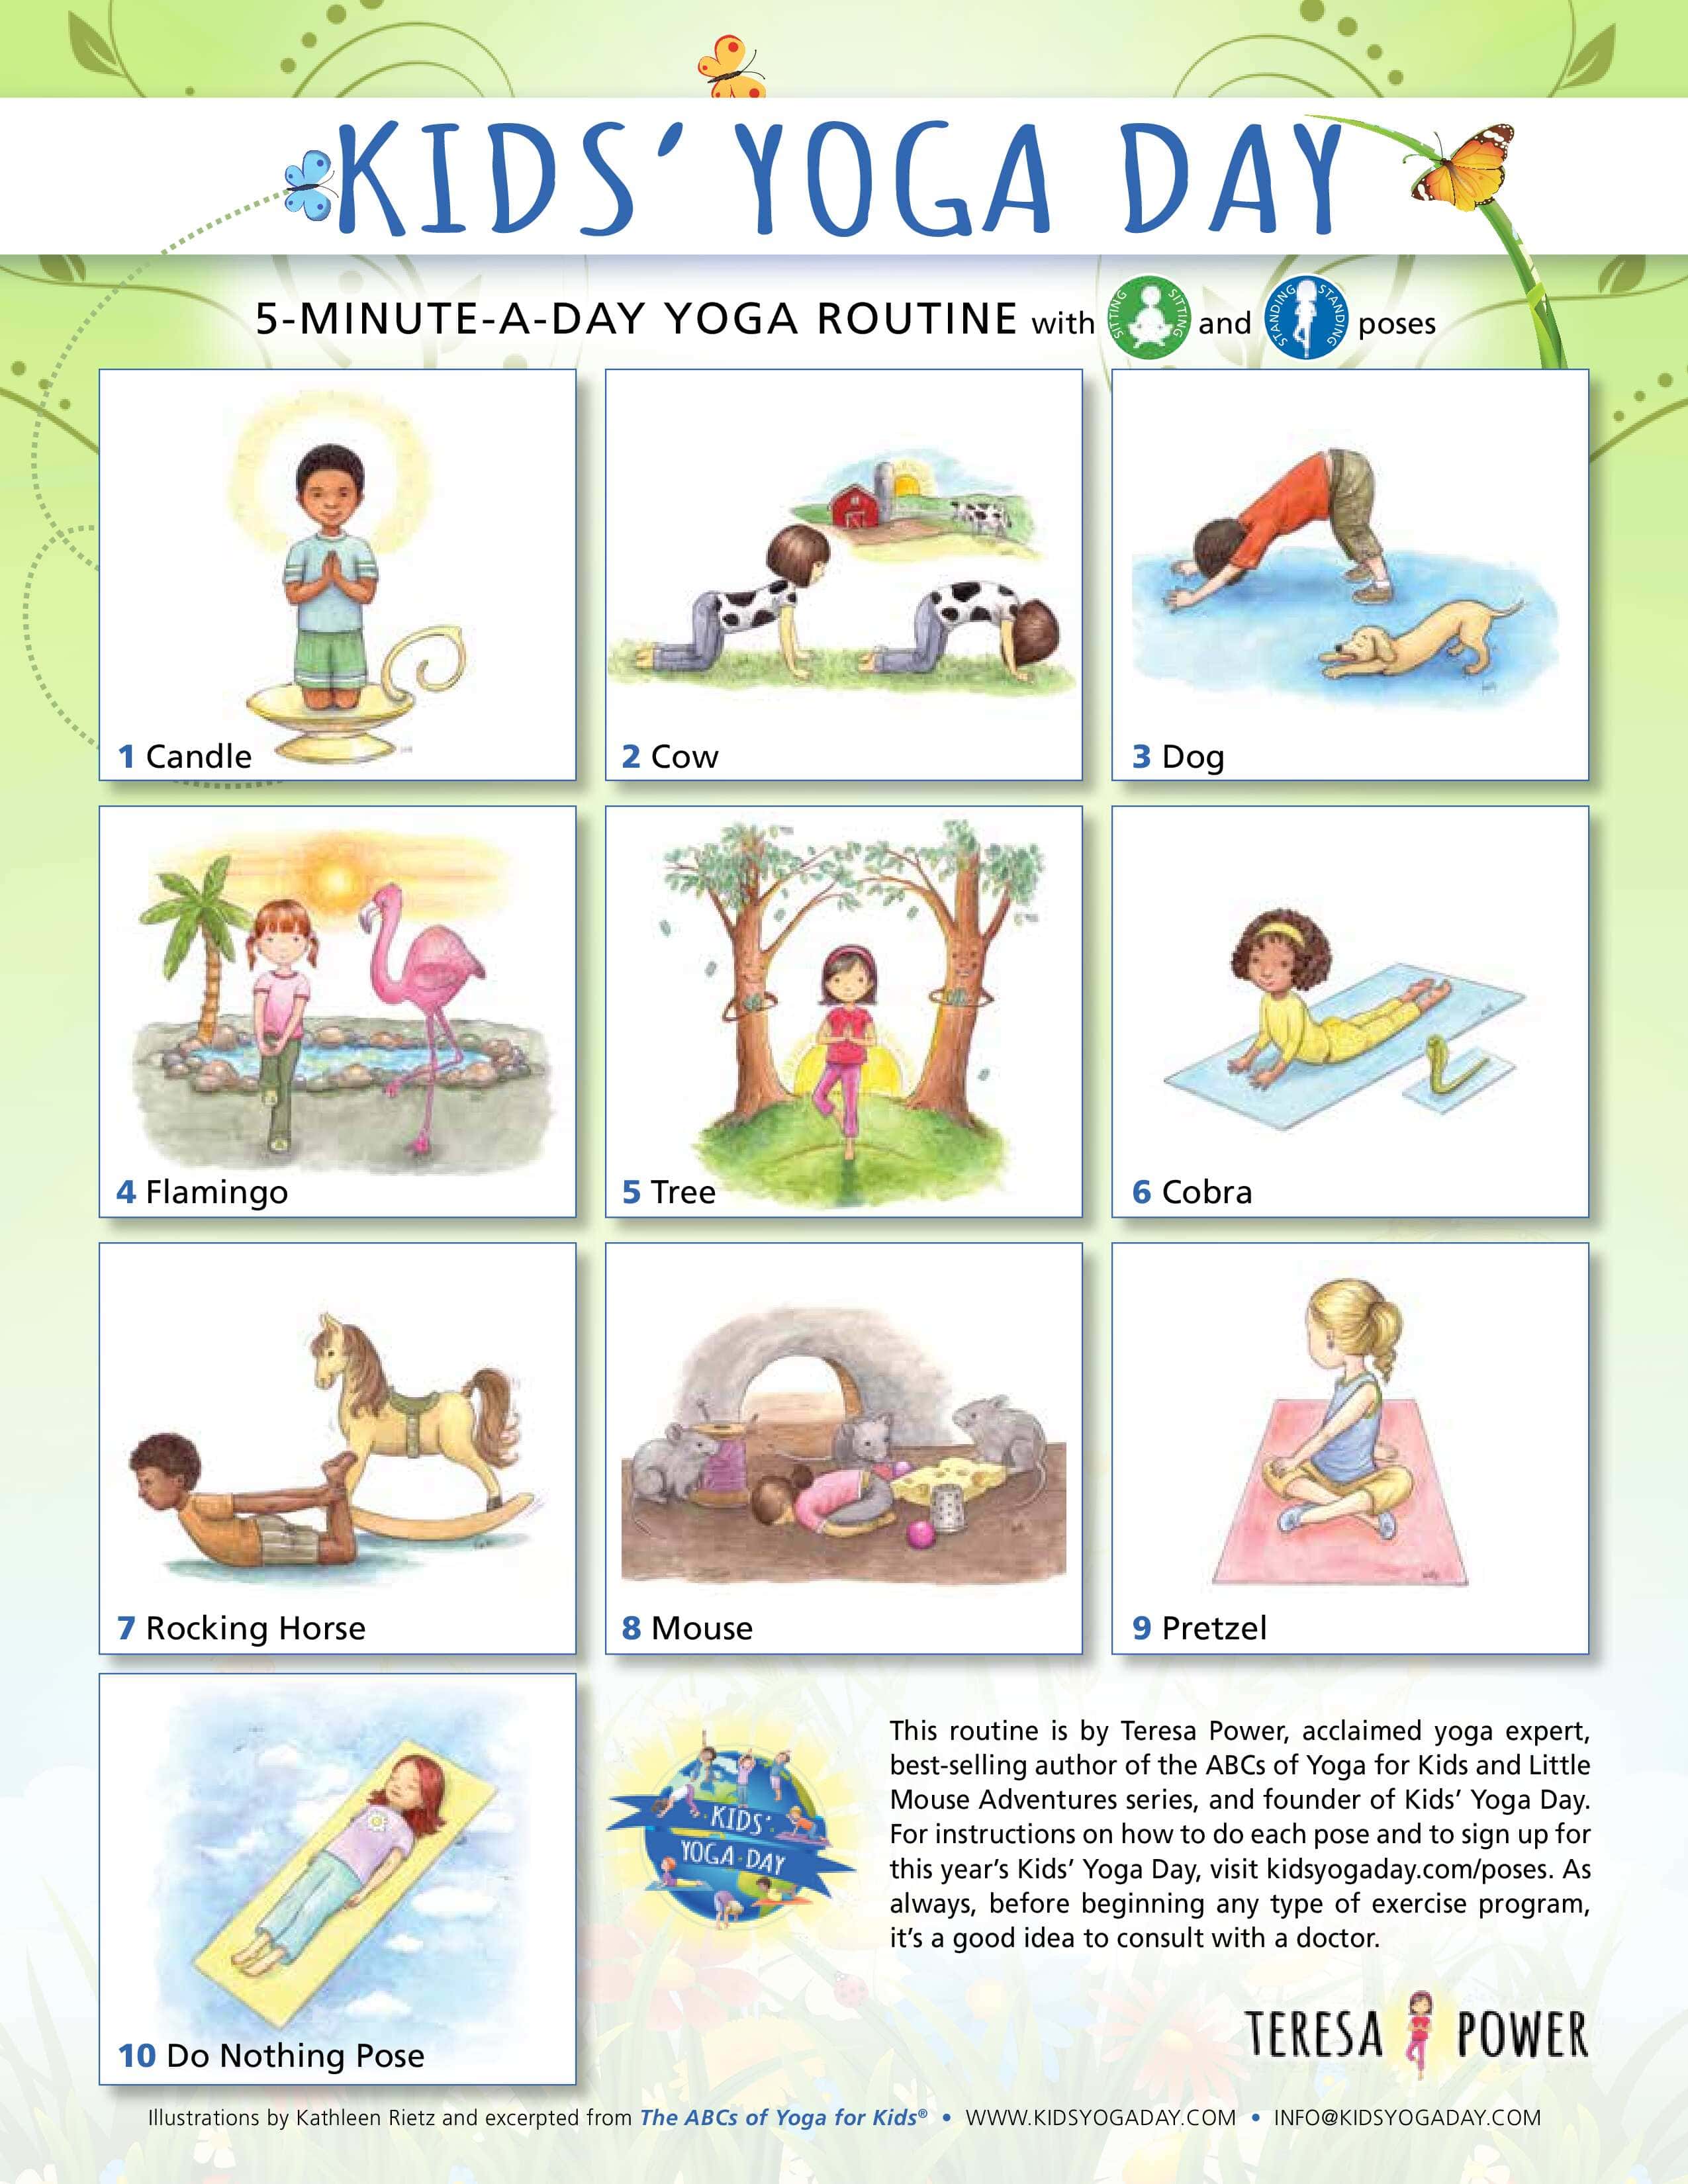 Snowga: Wintertime Yoga Poses for Kids - The Inspired Treehouse